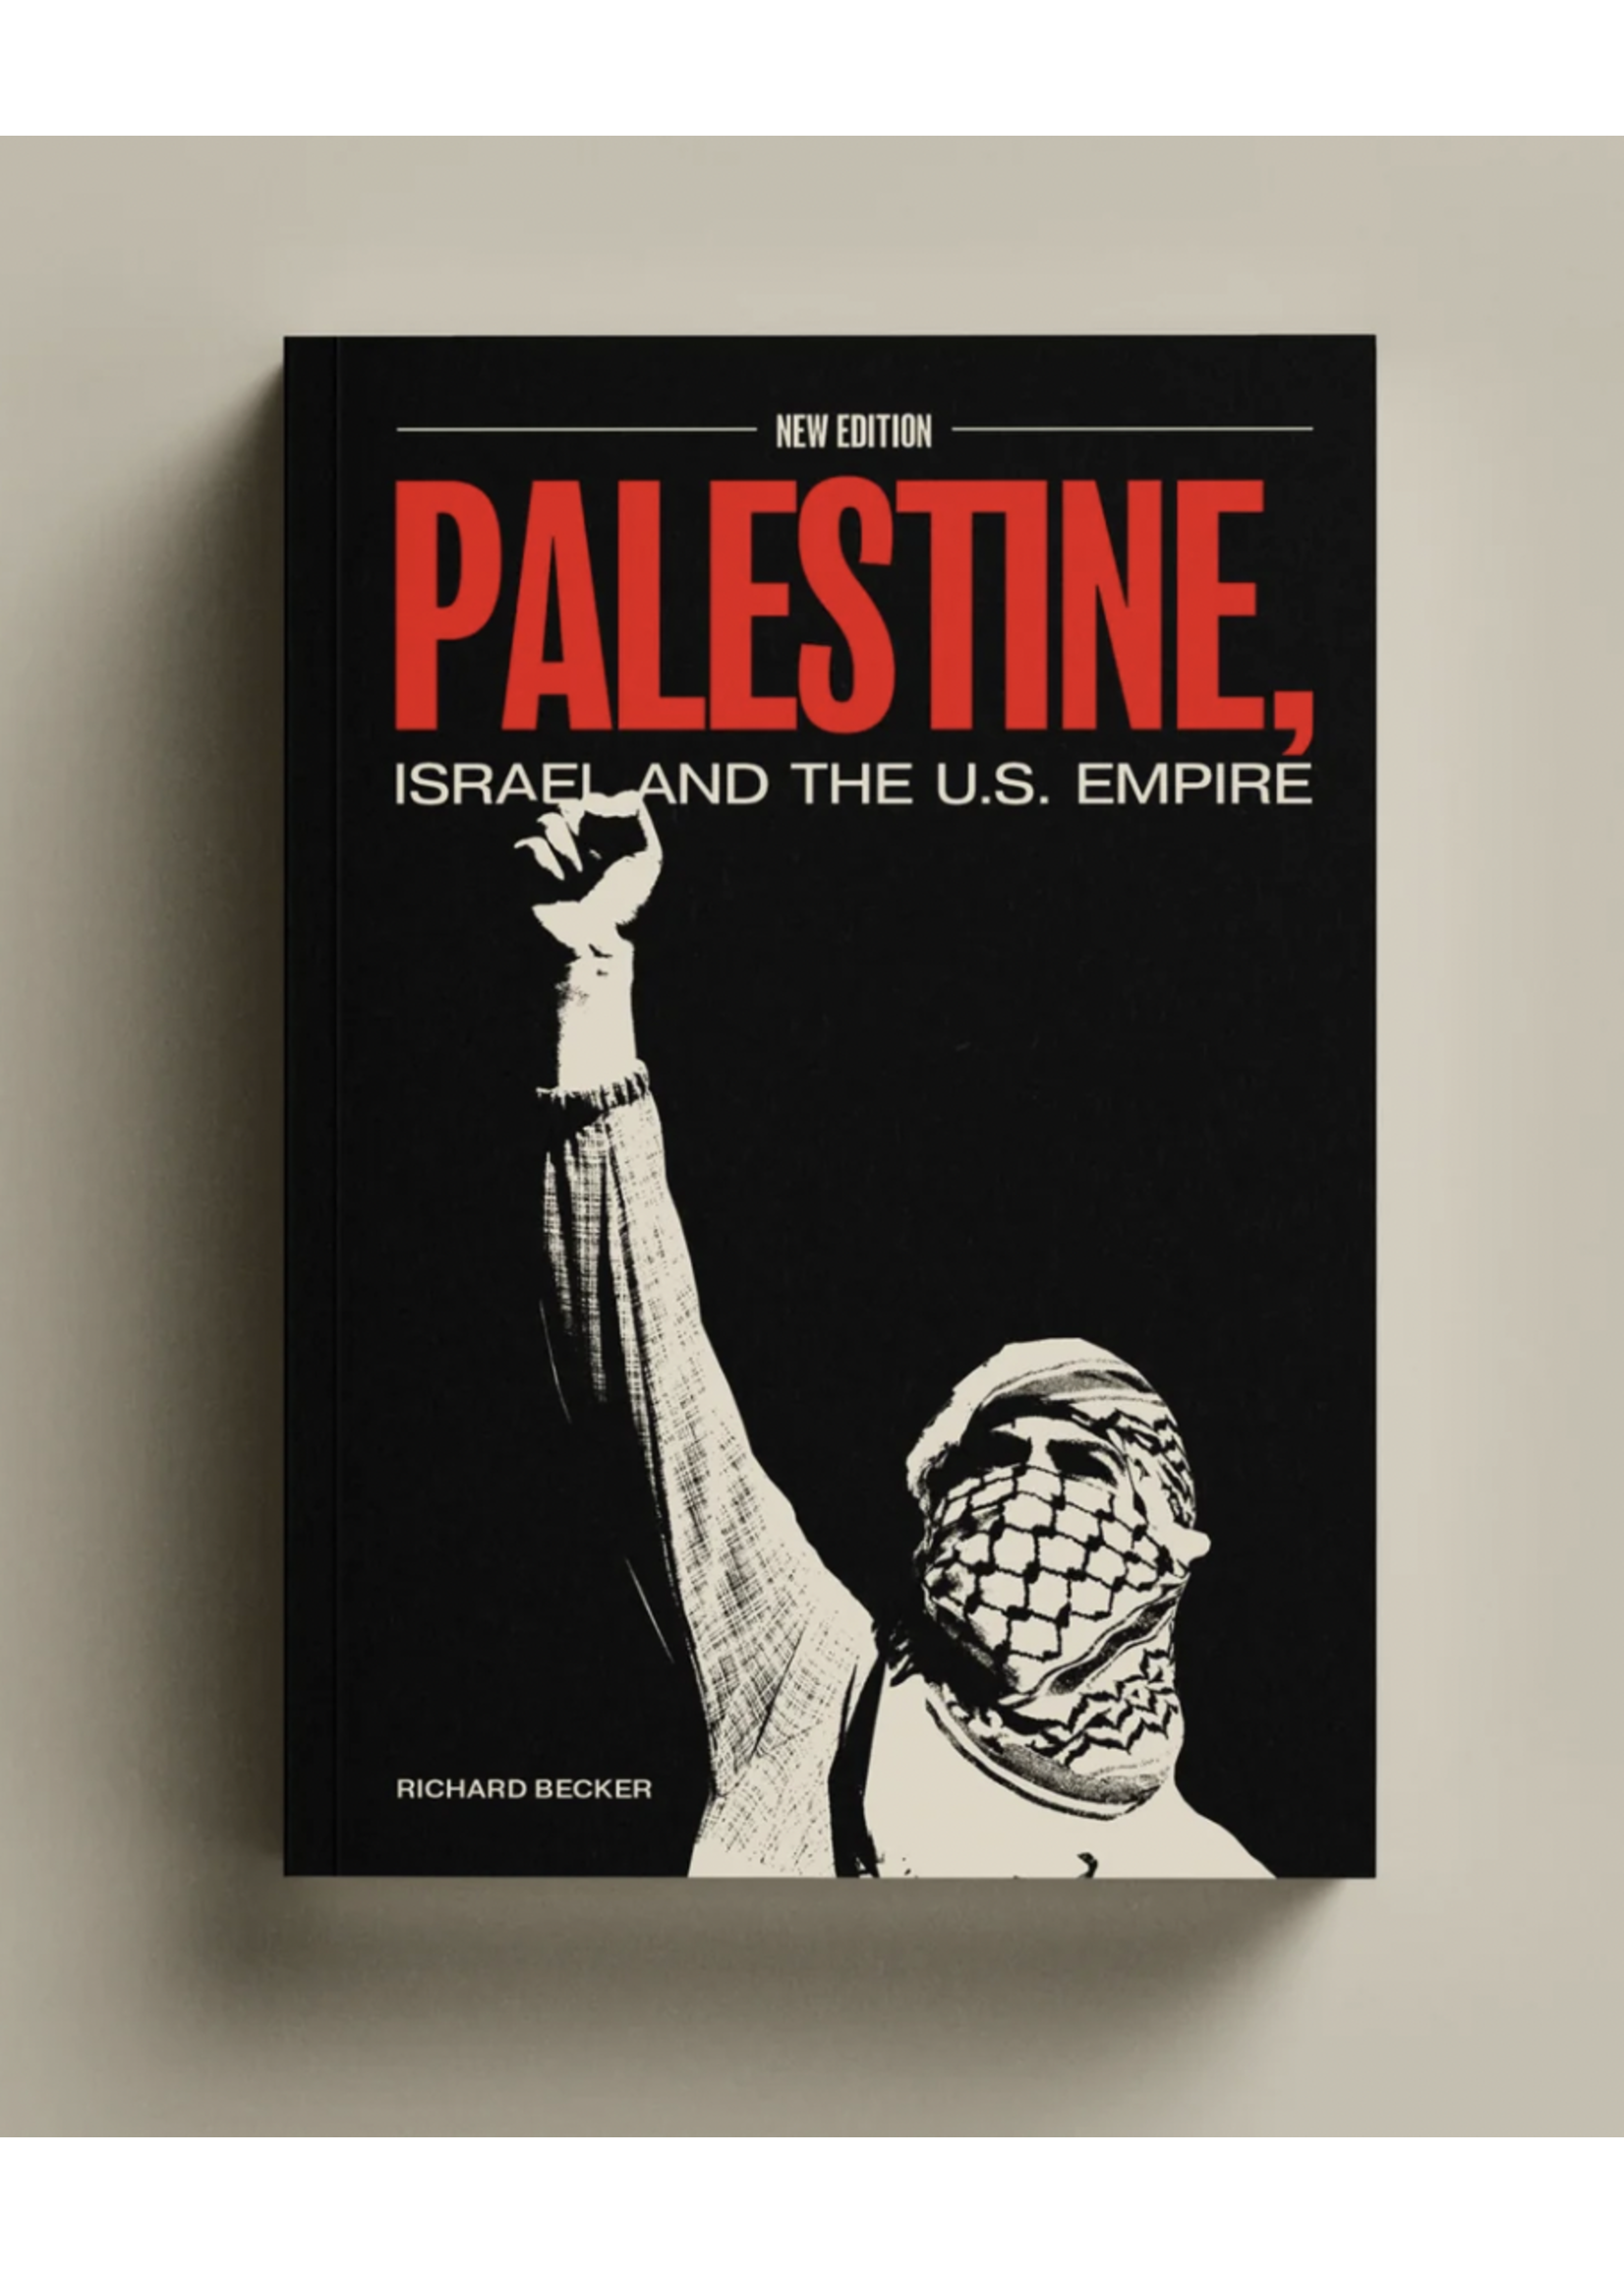 Palestine: Israel and the U.S Empire